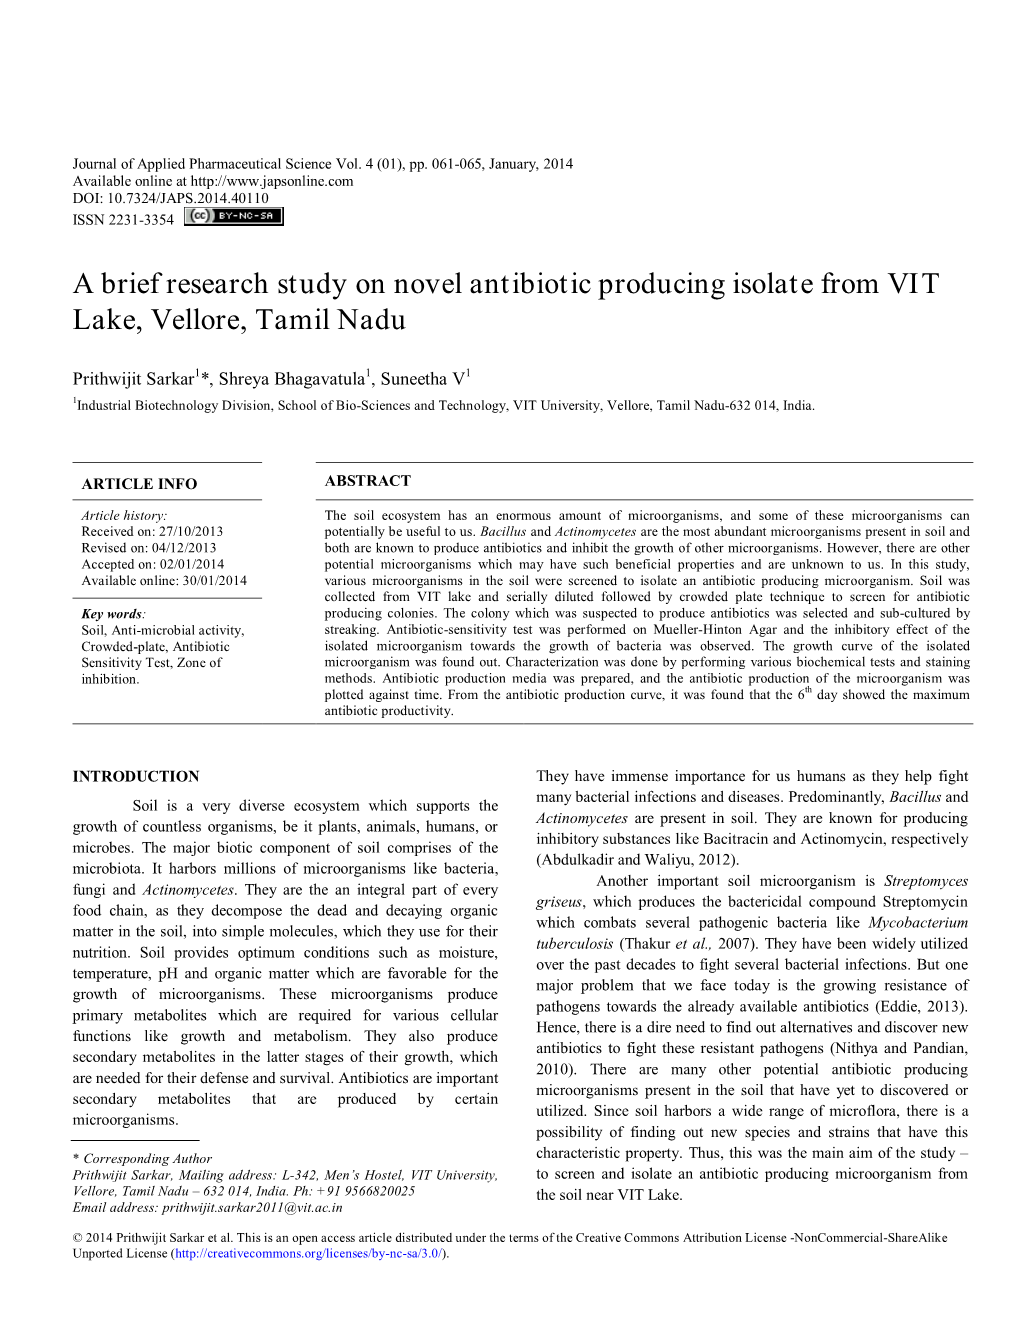 A Brief Research Study on Novel Antibiotic Producing Isolate from VIT Lake, Vellore, Tamil Nadu